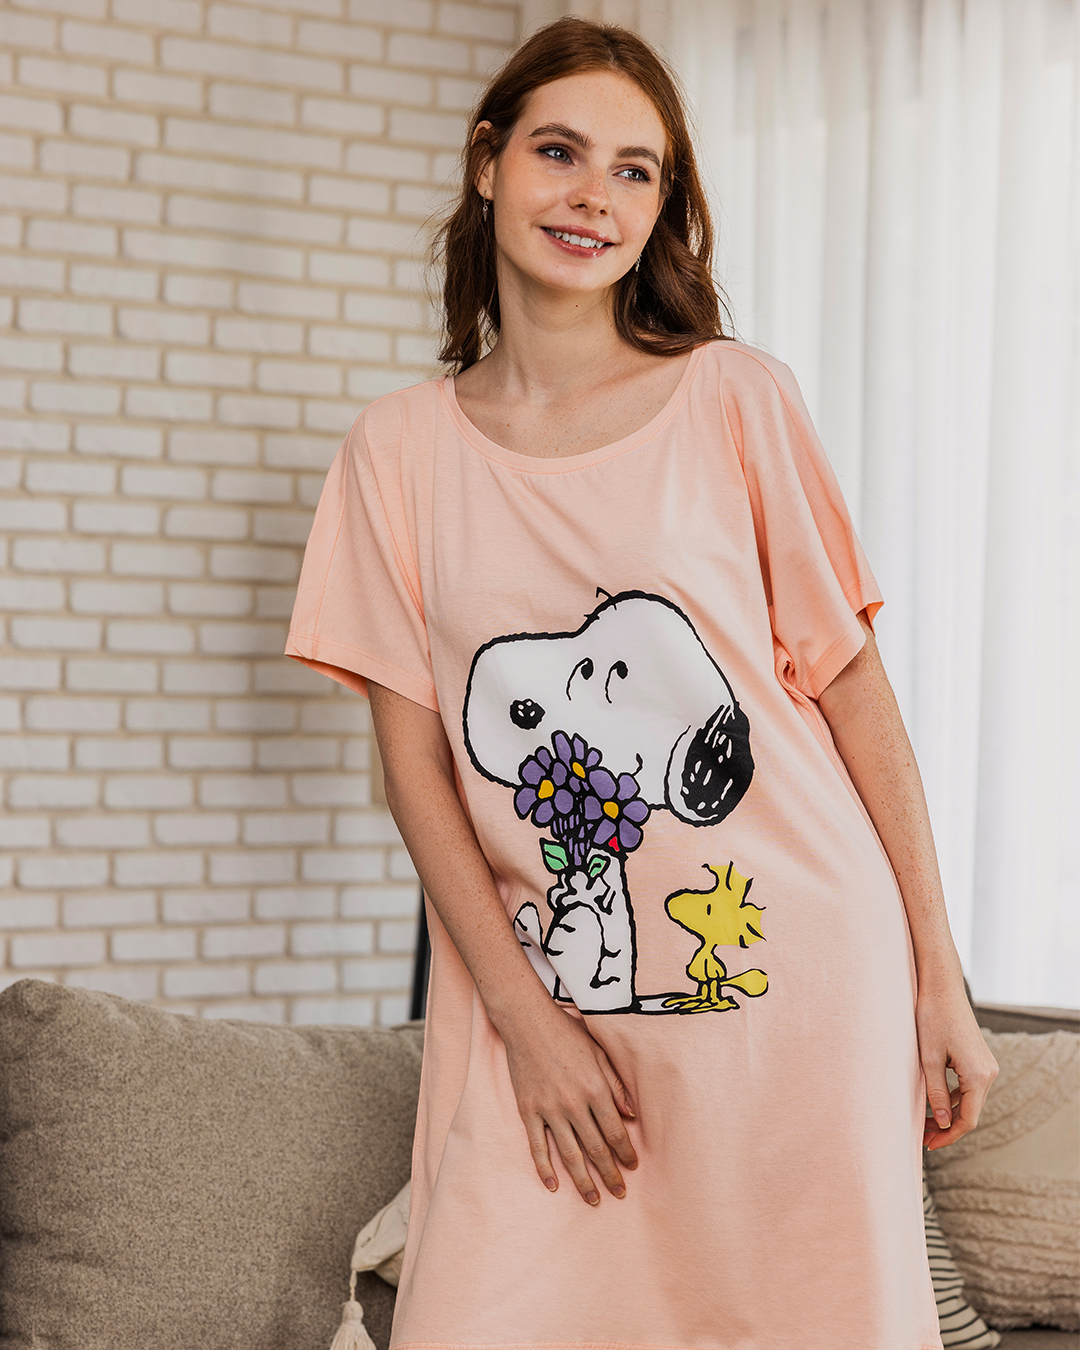 Snoopy Women's Snoopy Printed Shirt